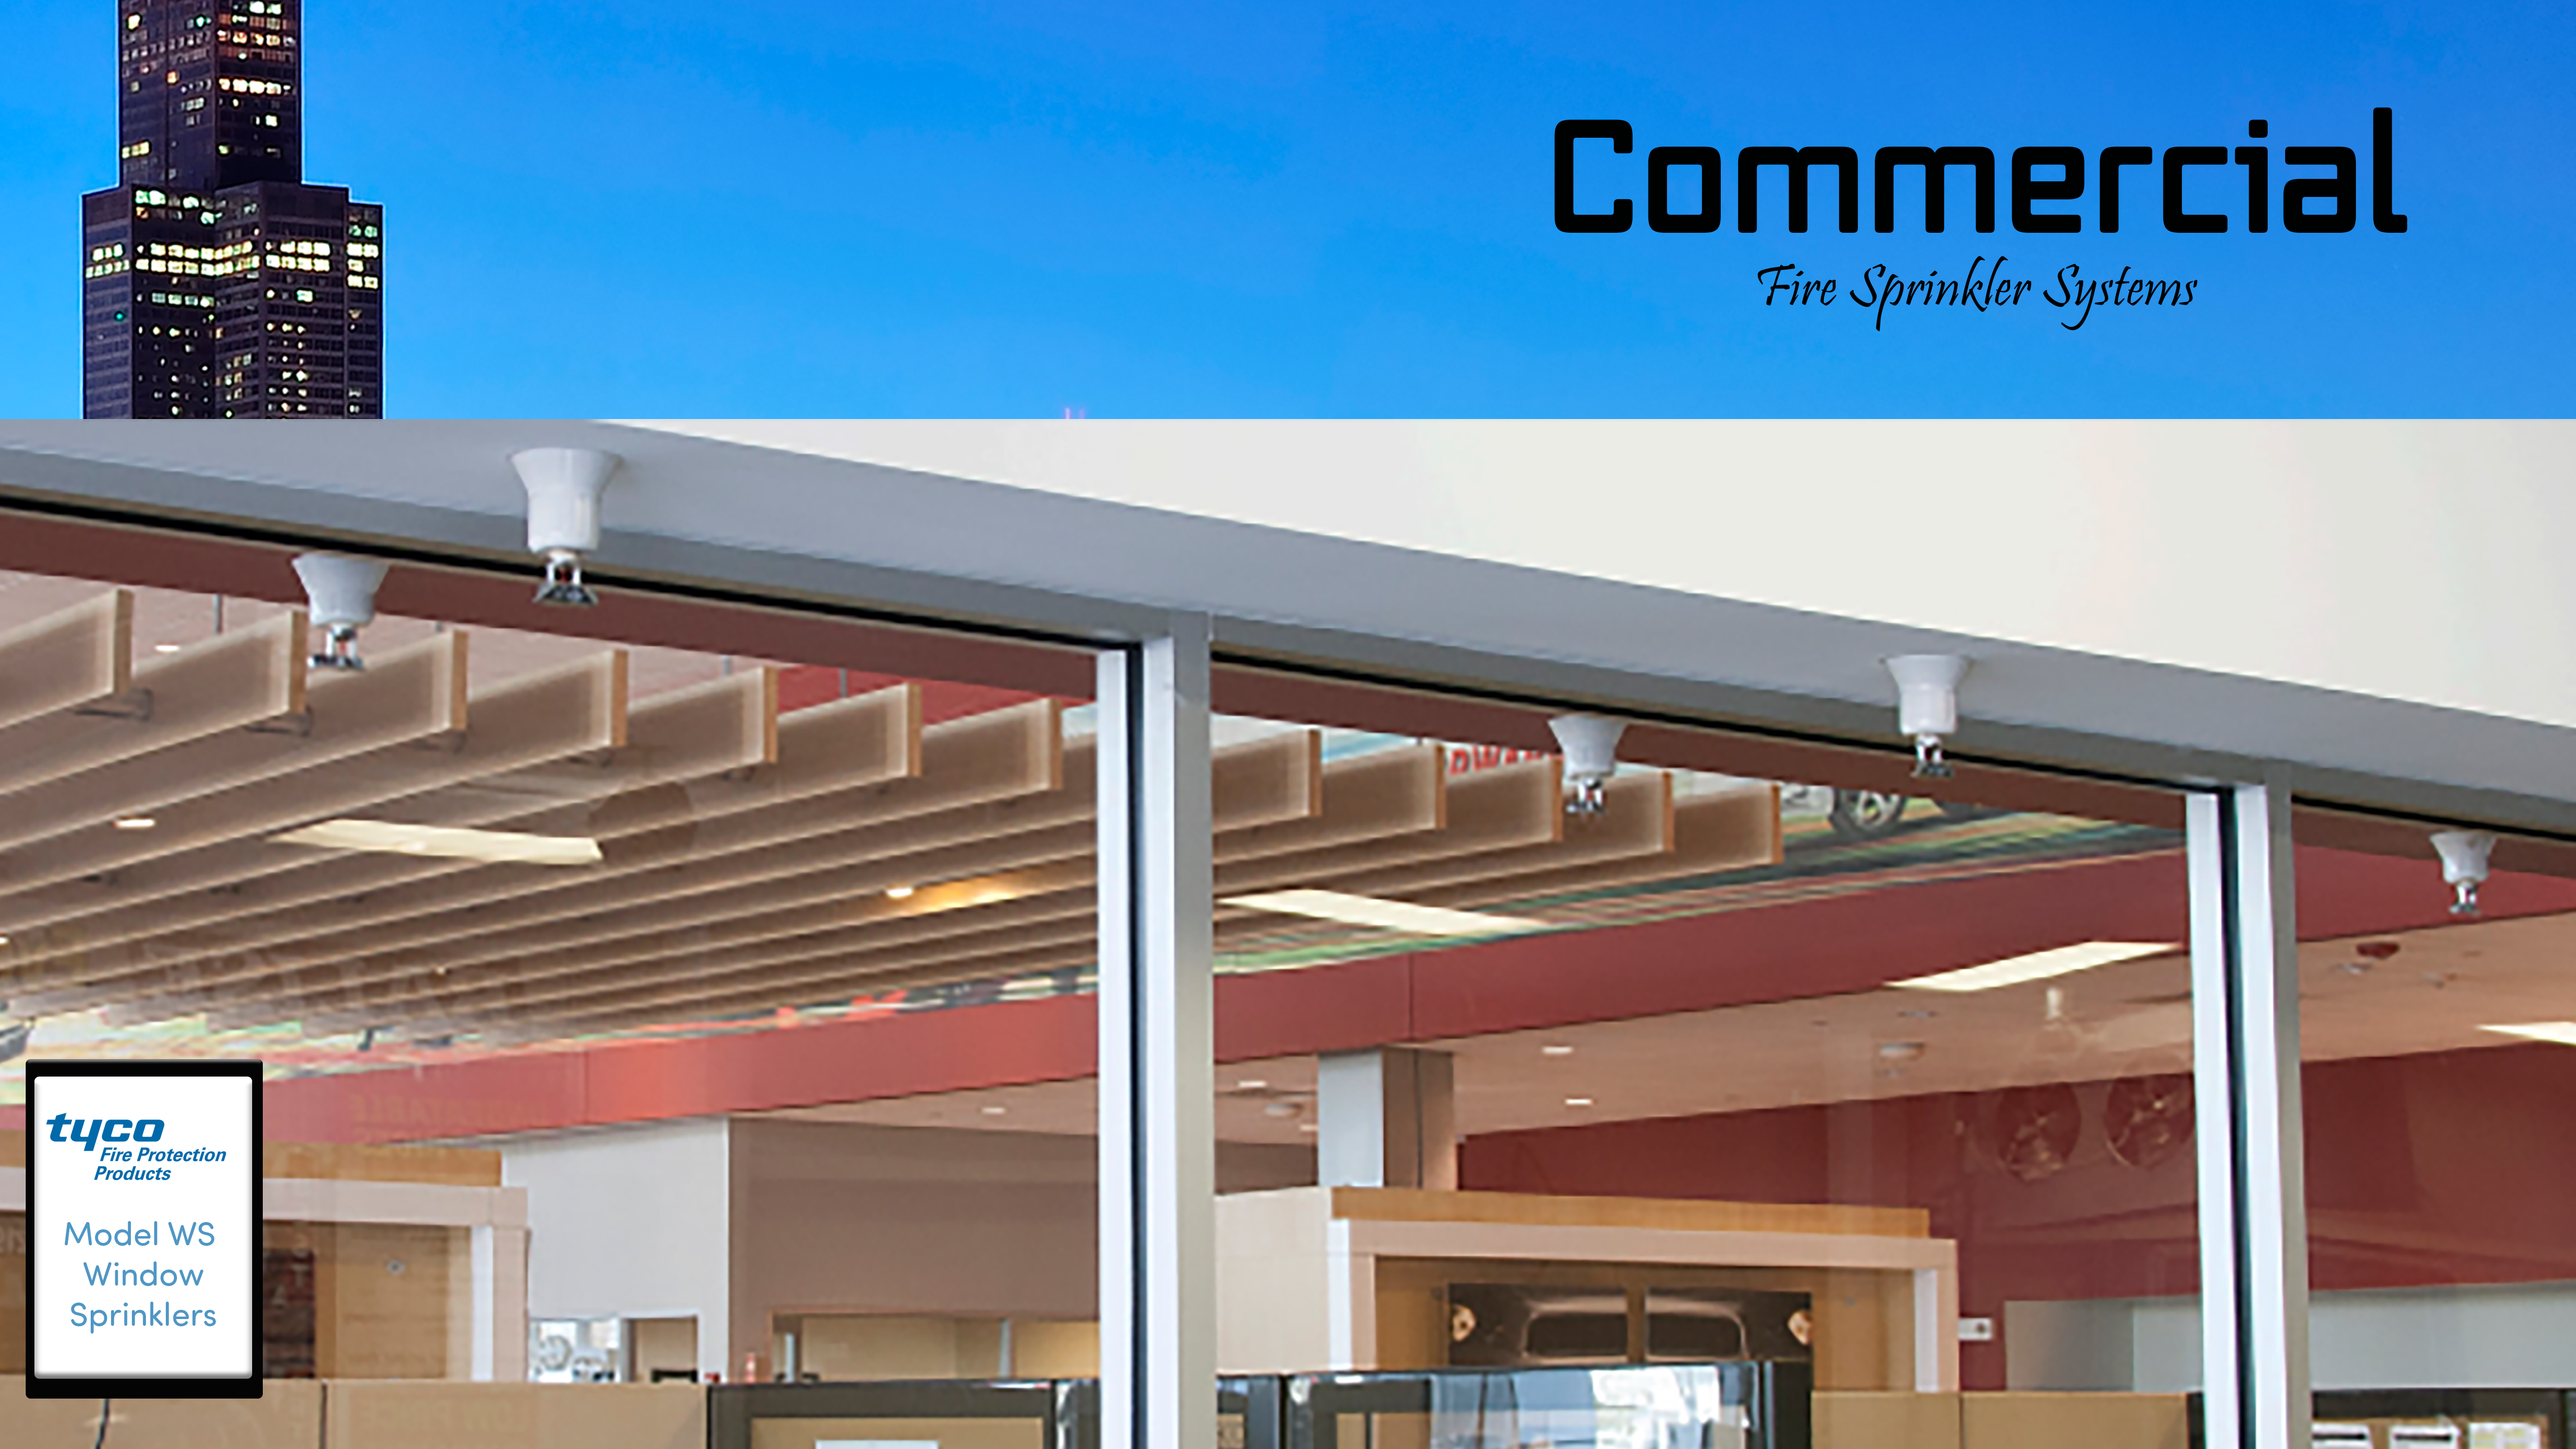 Commercial Fire Sprinkler Services in Oakland, California